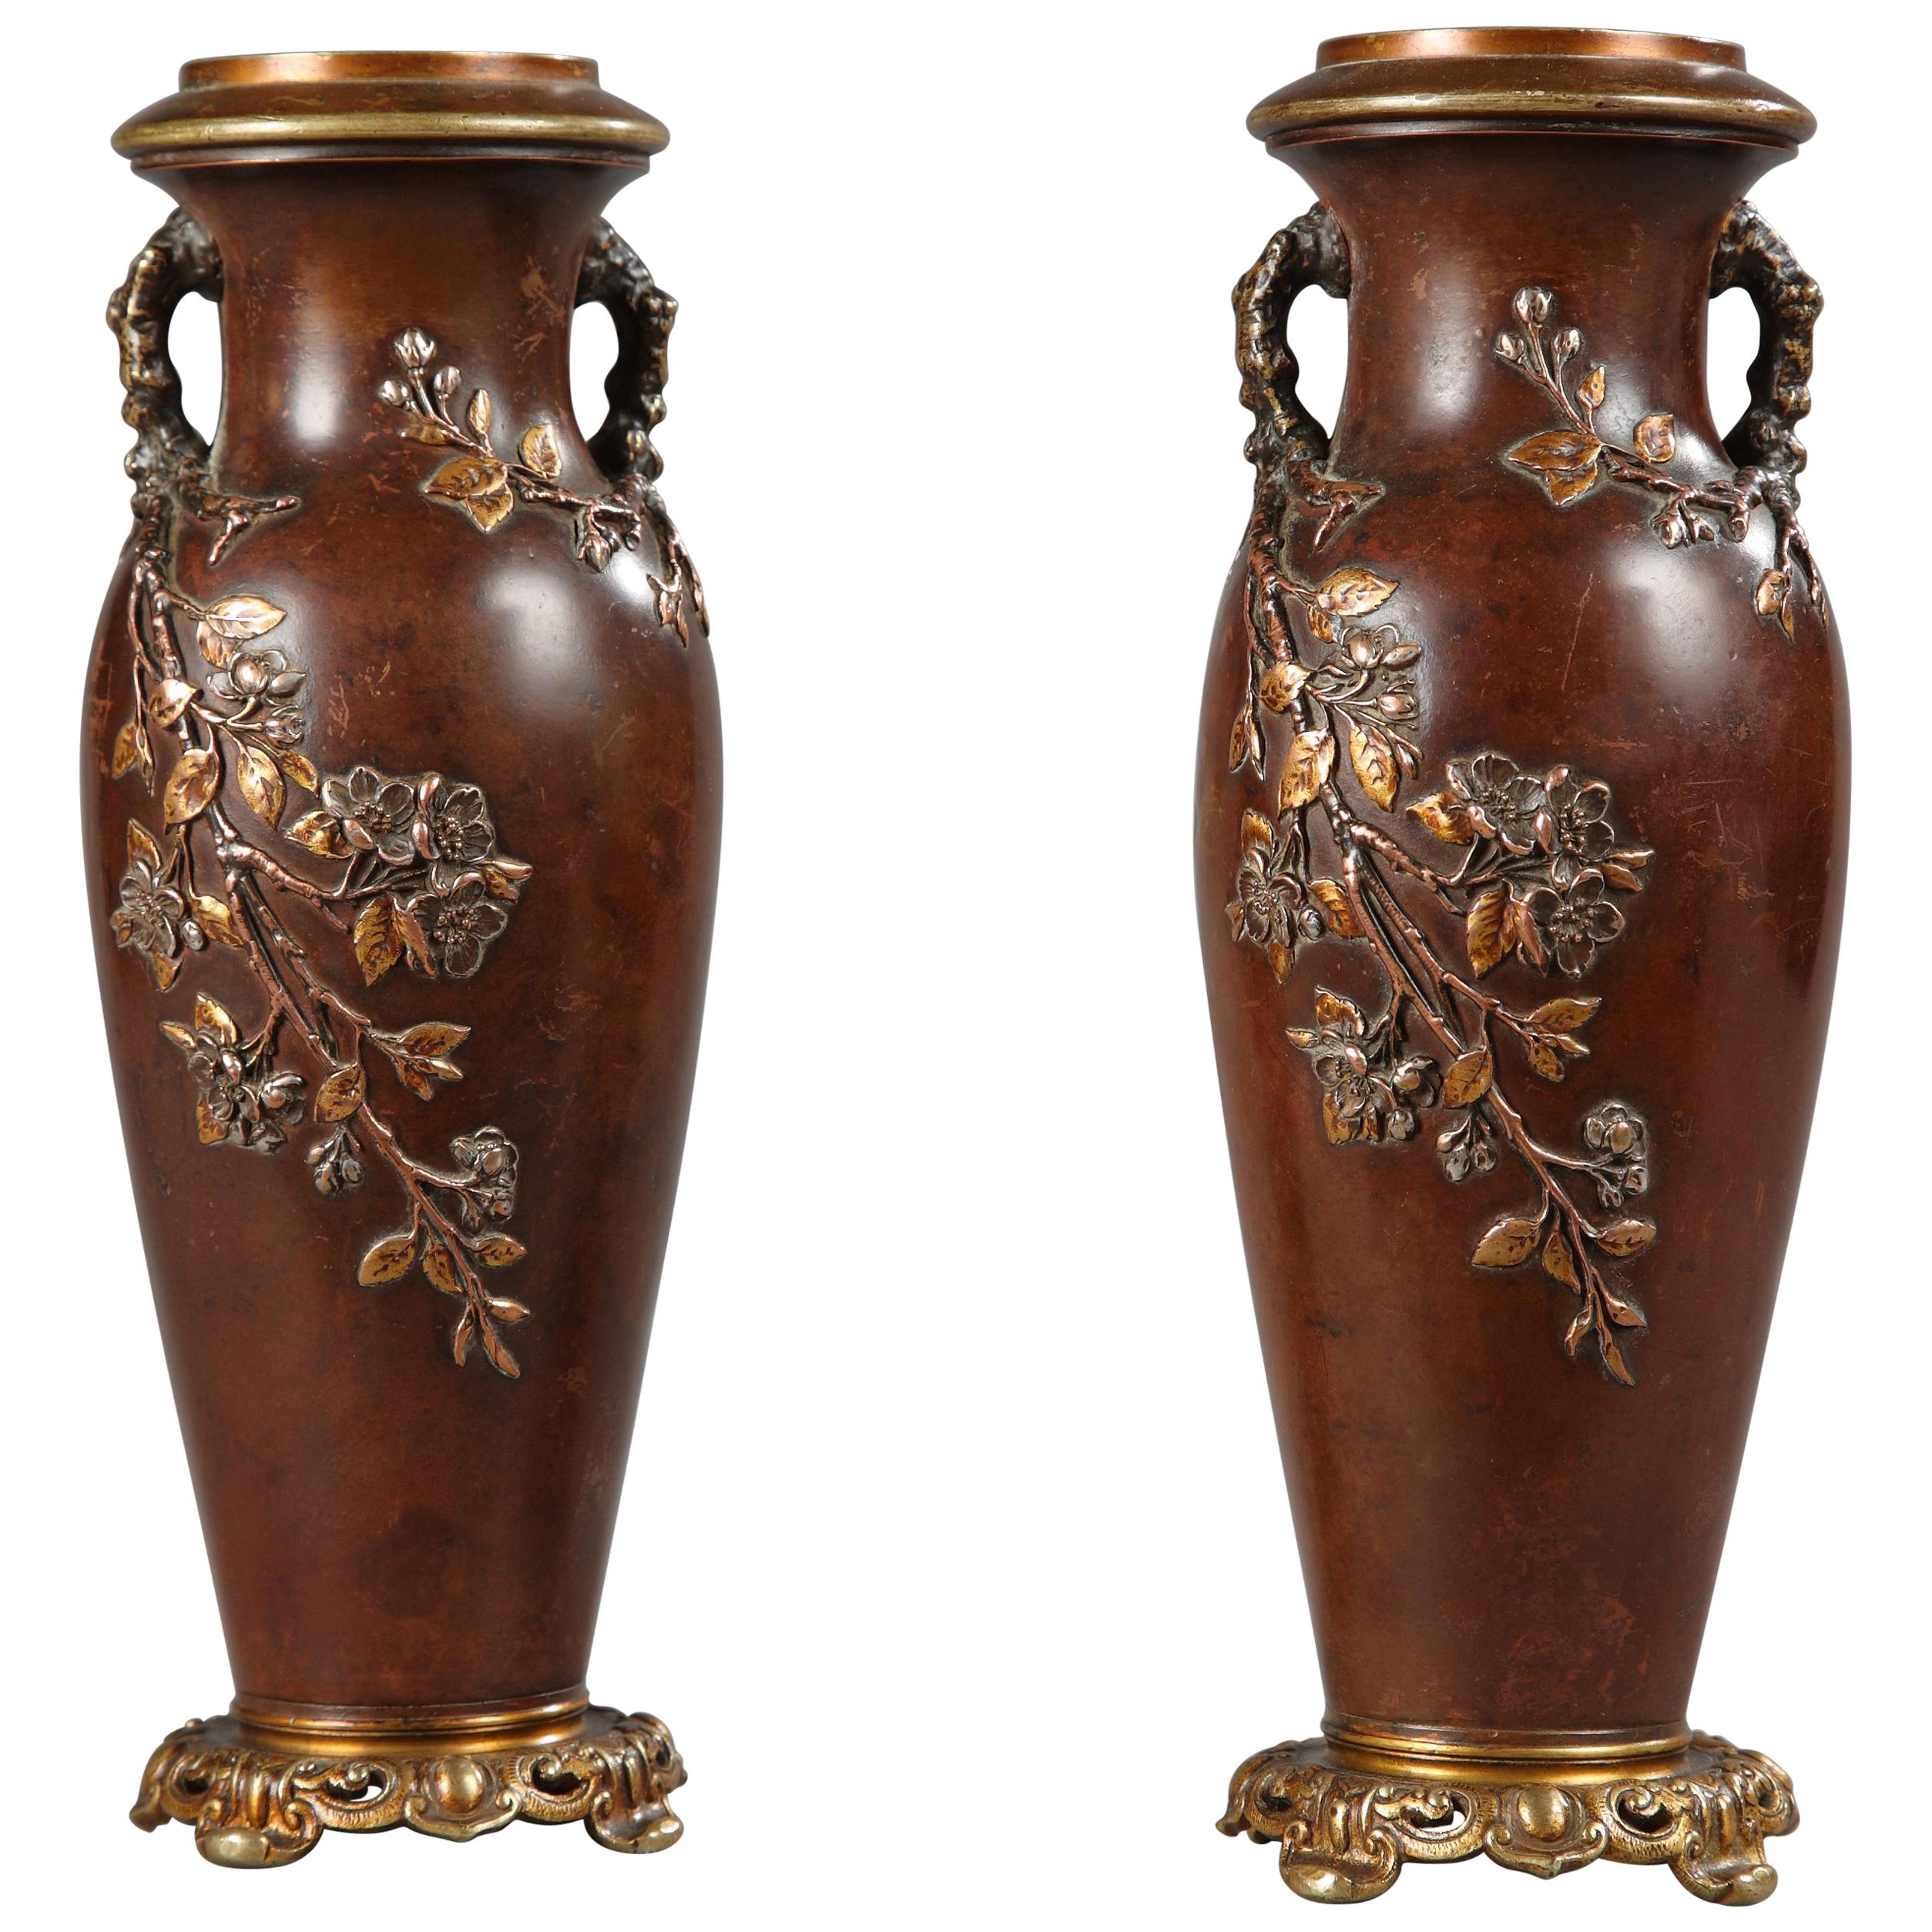 Pair of Aesthetic Movement Vases Attributed to Susse Frères, France, Circa 1880